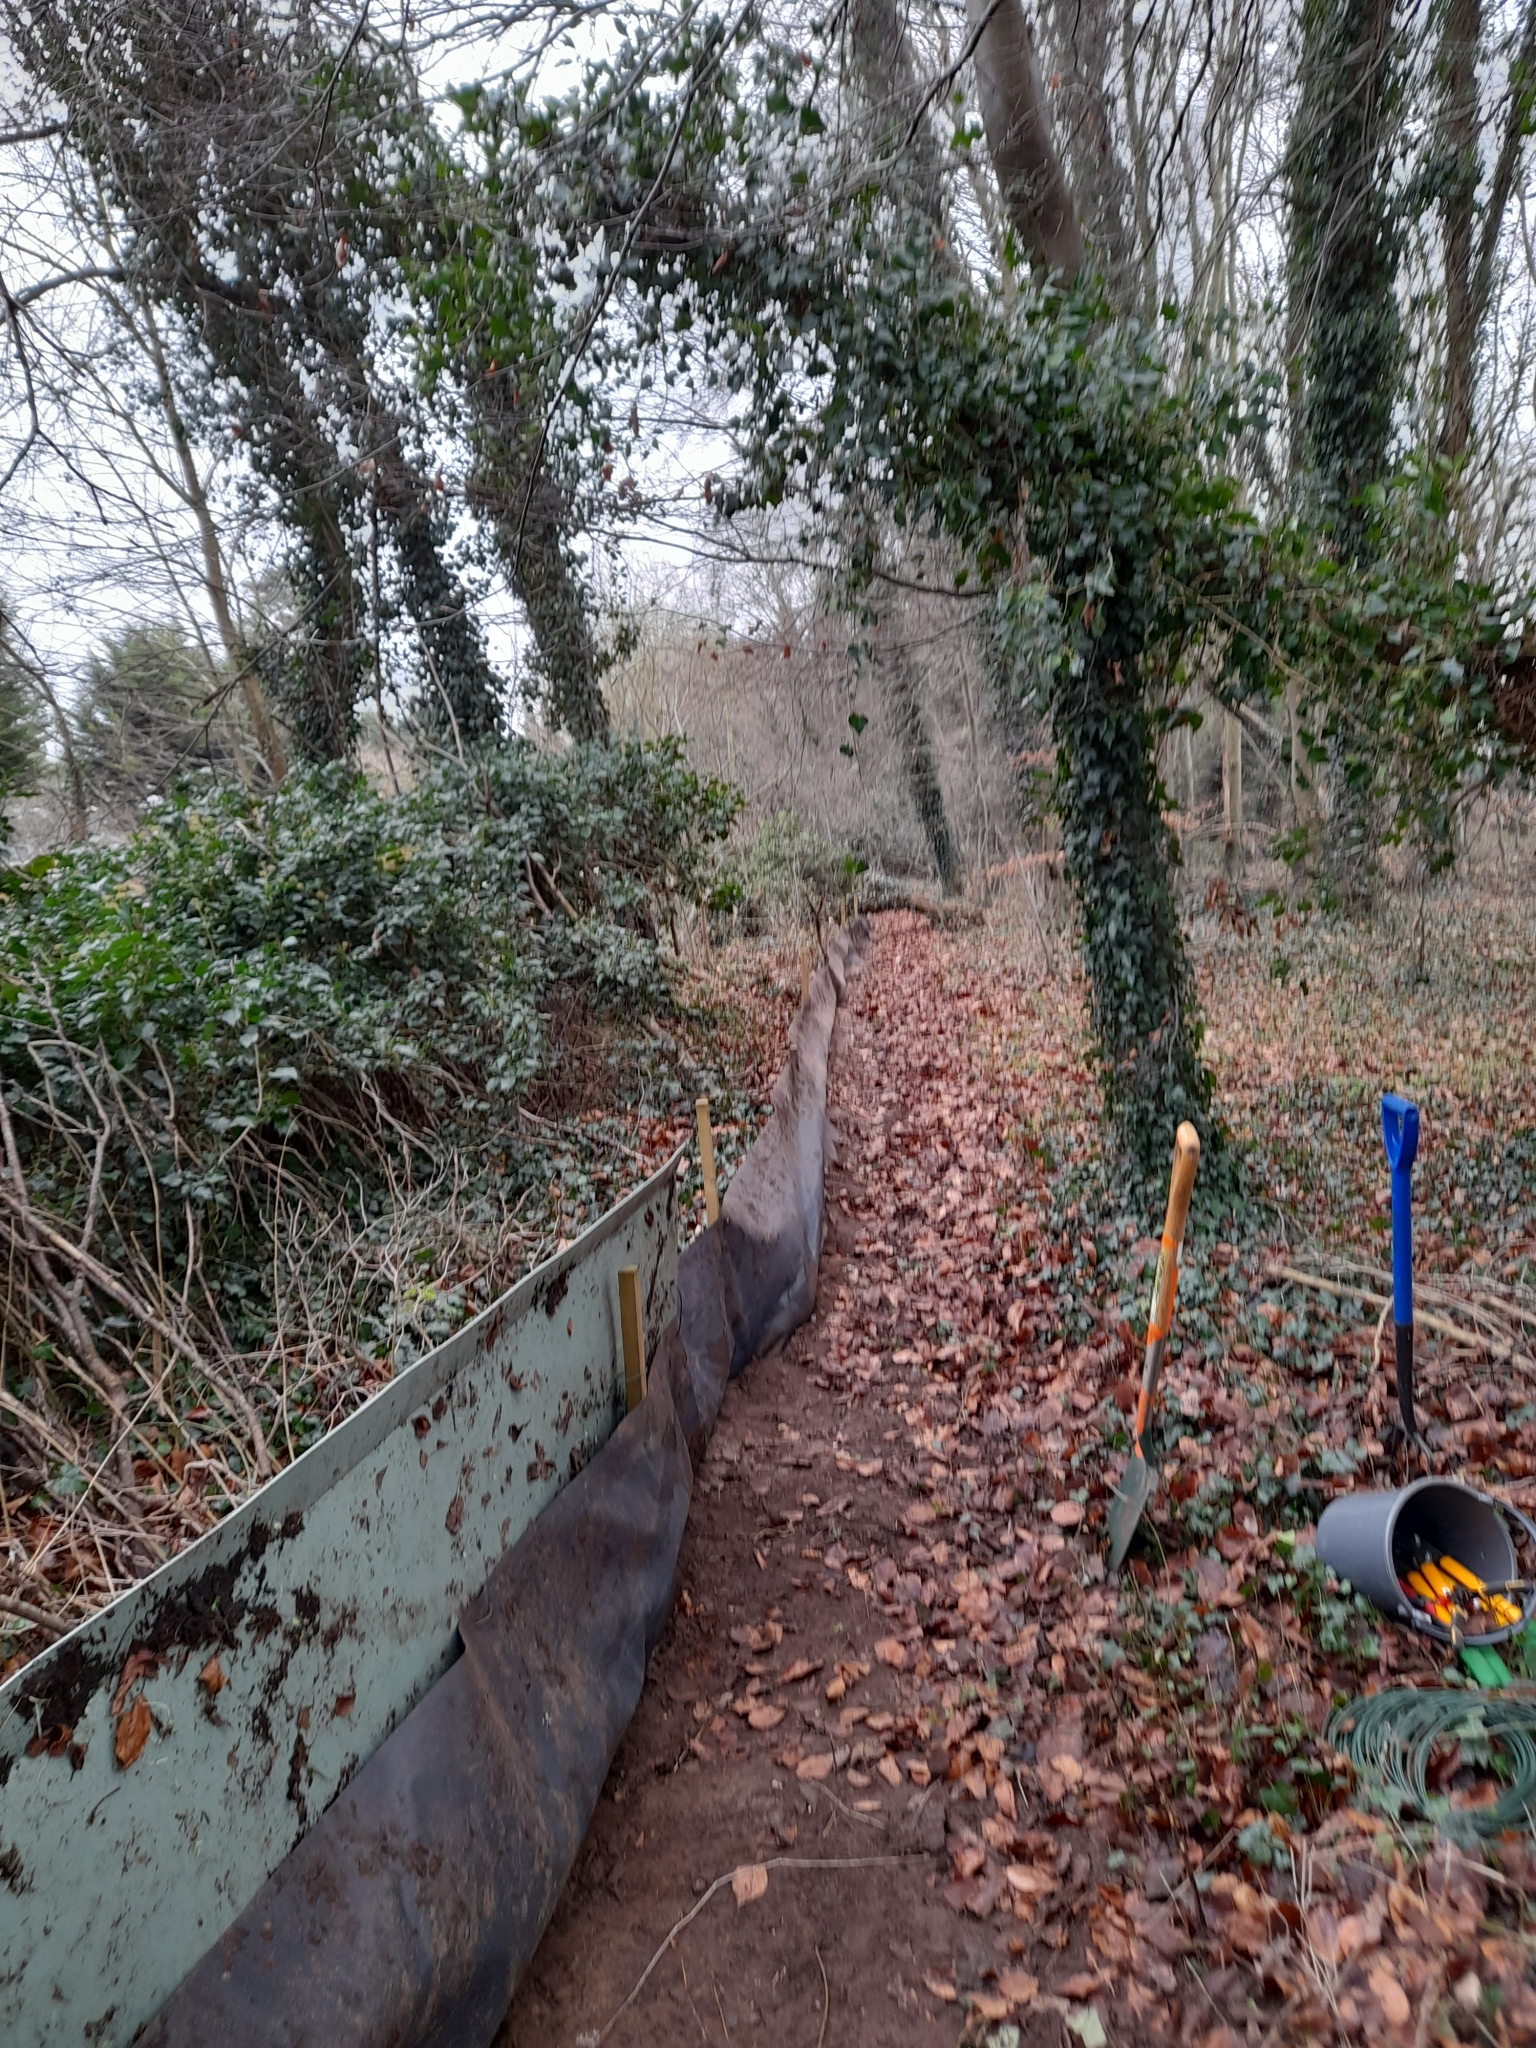 A photo from the FoTF Conservation Event - January 2022 - Erection of toad fence : A section of the toad fence, along with some of the tools required to erect the fence